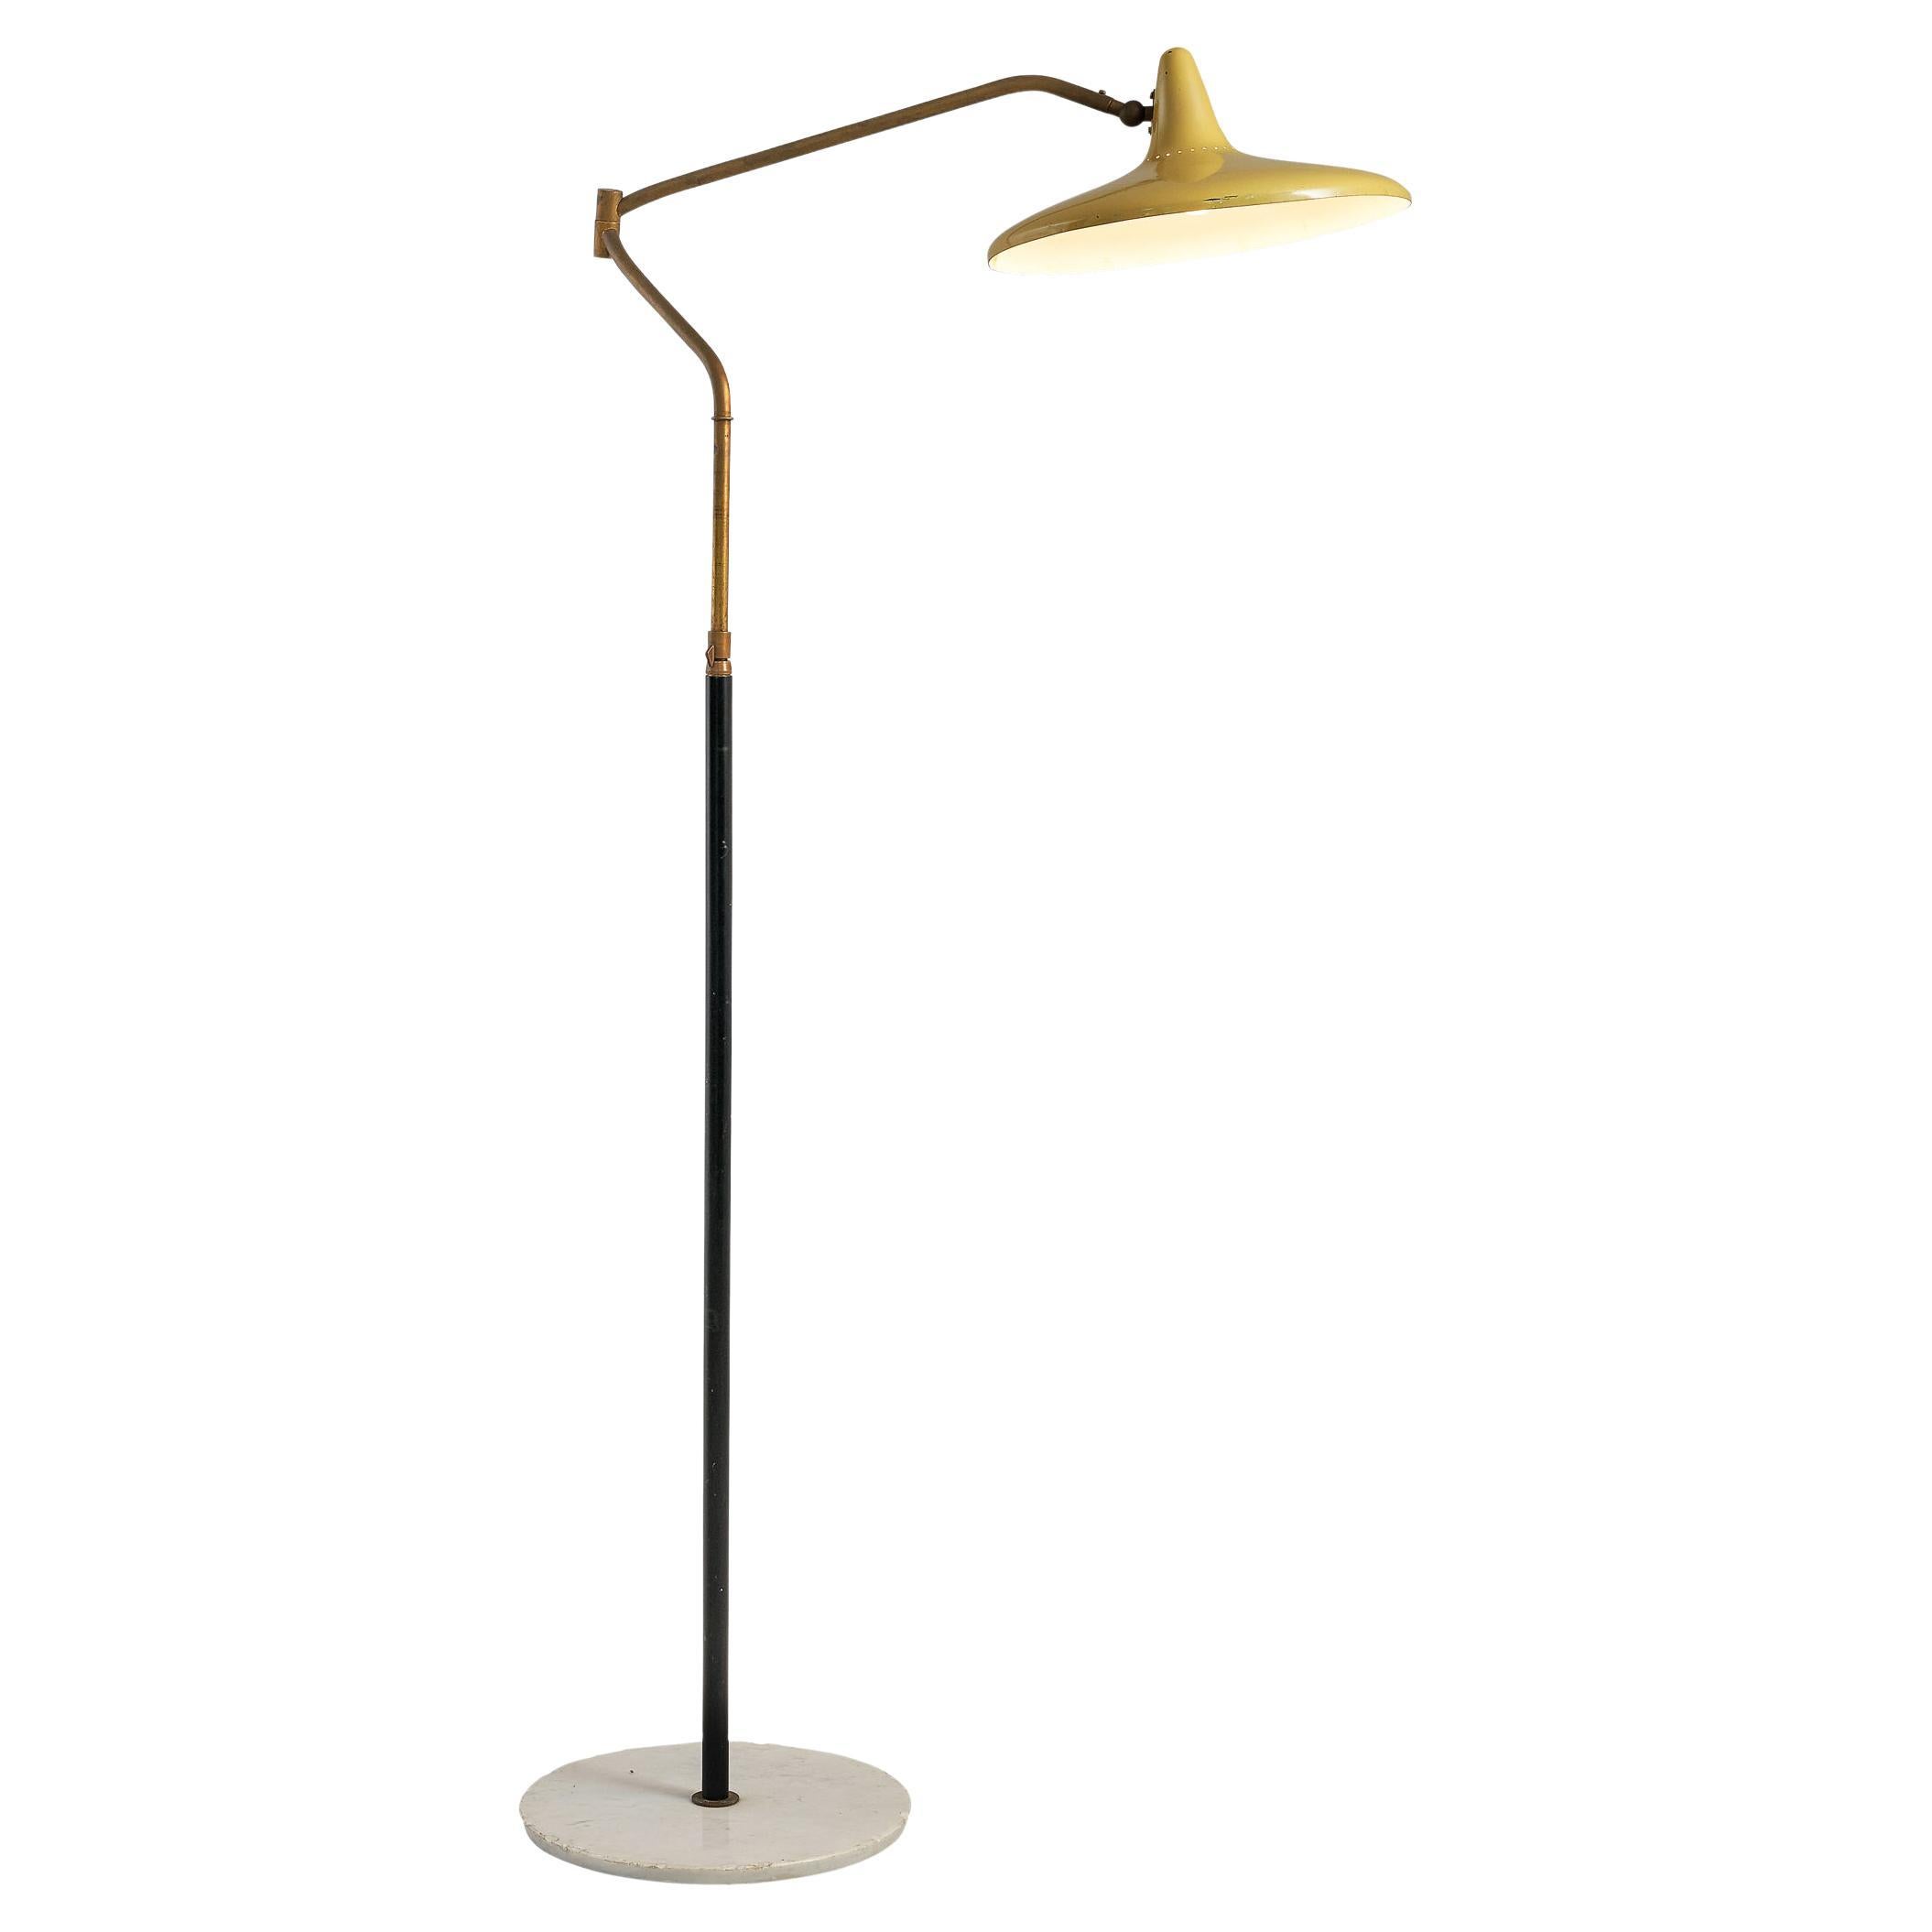 Stilnovo Adjustable Floor Lamp in Marble and Yellow Shade